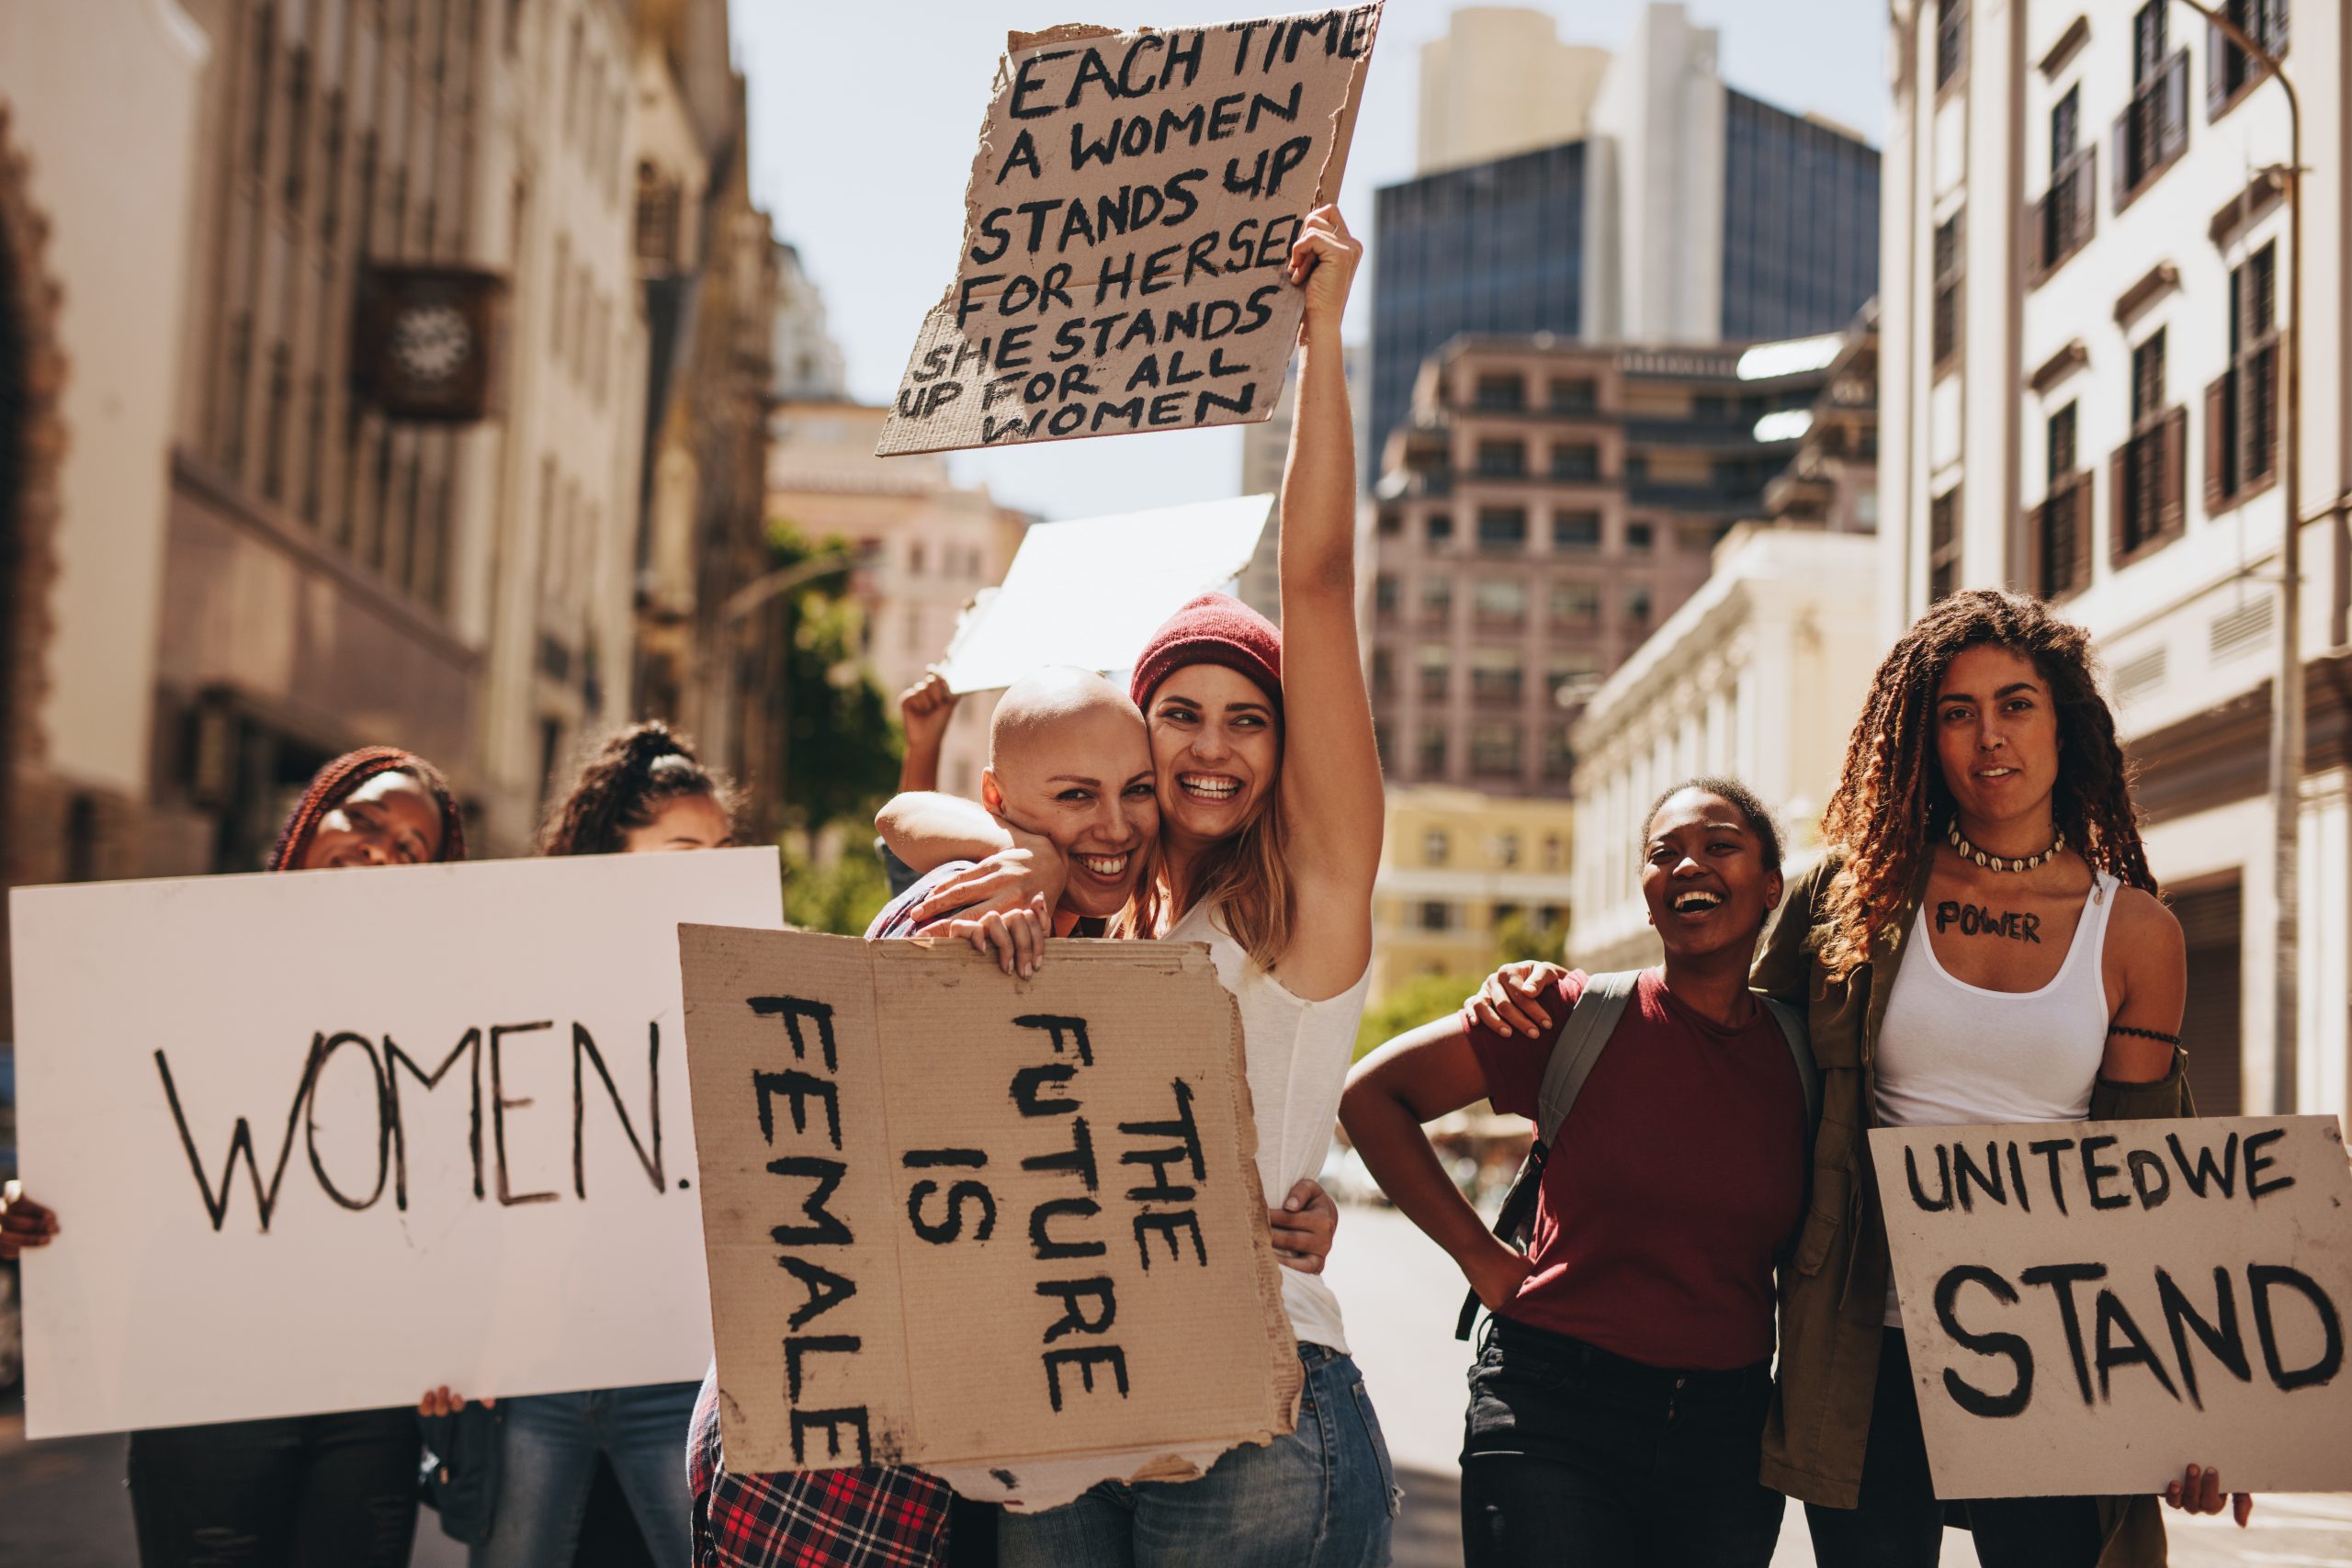 group of women hold signs about women's progress